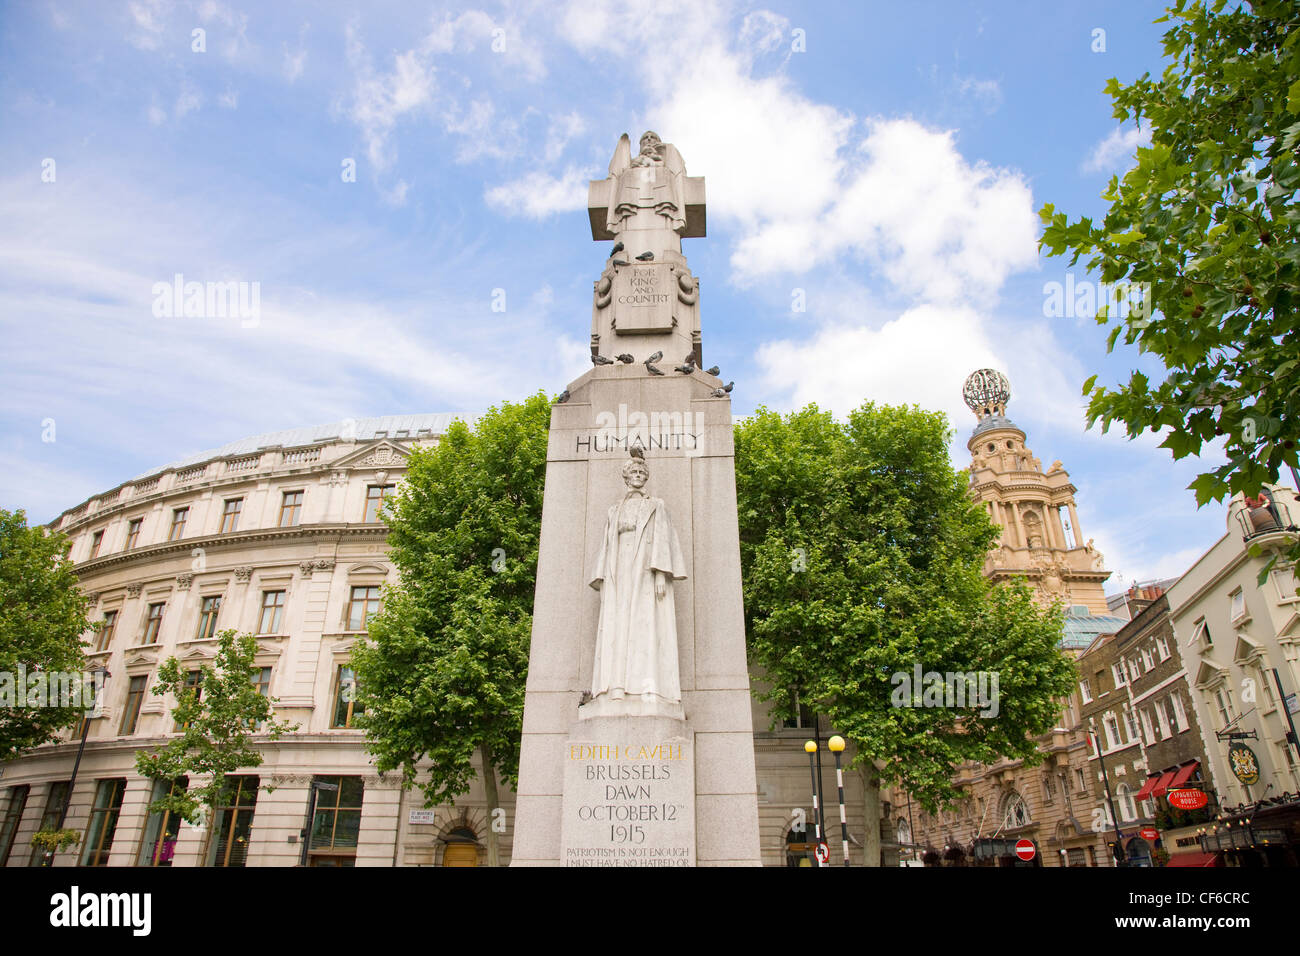 A statue commemorating the life of Edith Cavell in St Martin's Place near Trafalgar Square. Stock Photo